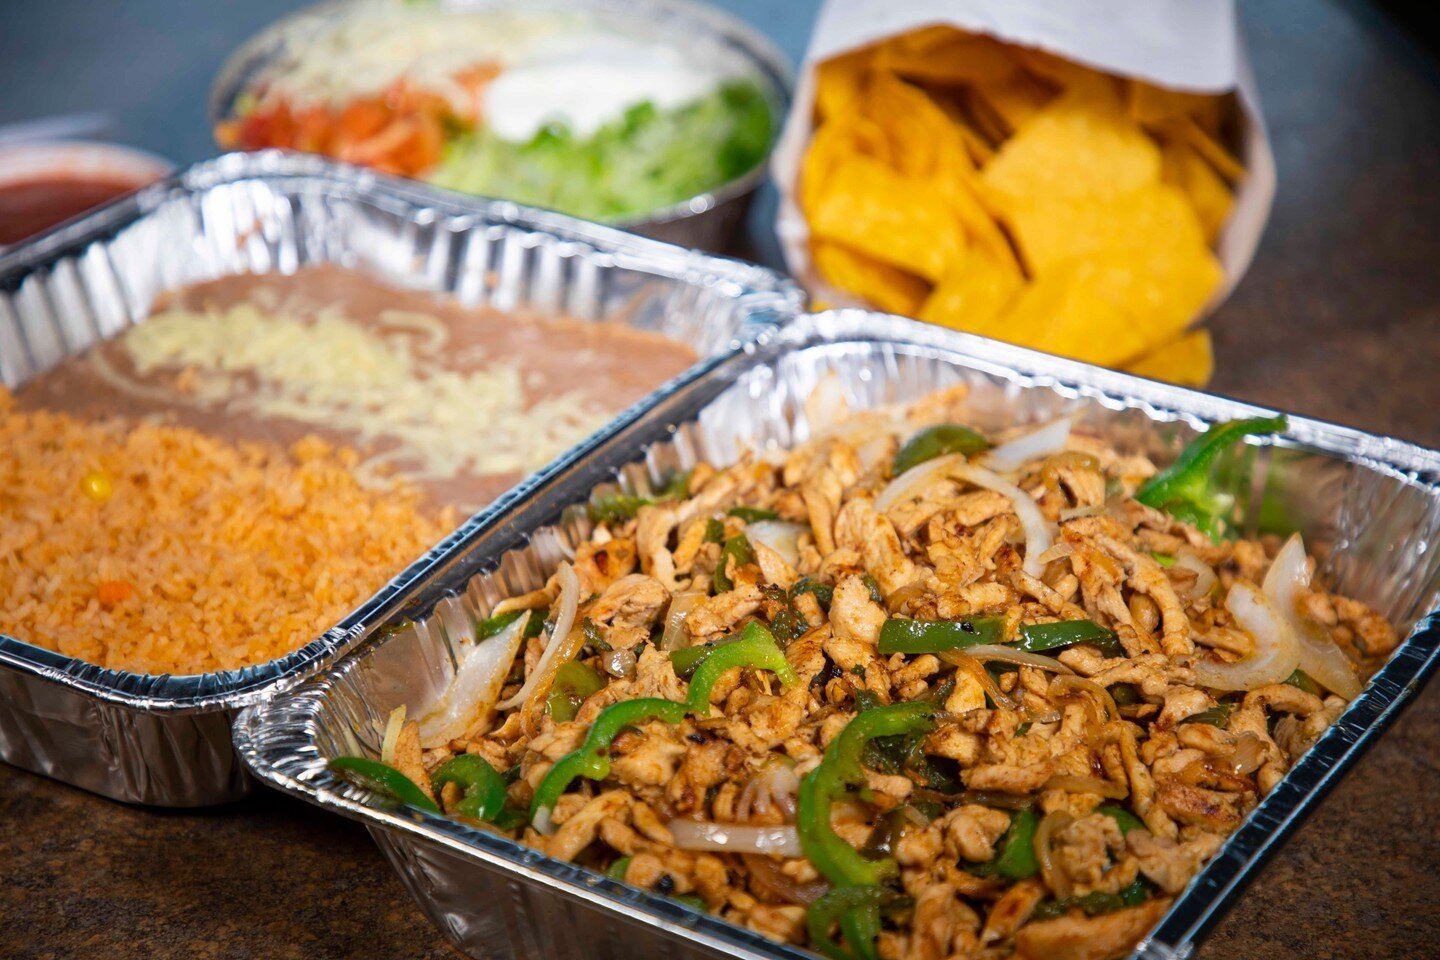 Bring the Monterrey fiesta to your holiday celebration with our catering! 🥳 Call a location near you and start planning your event today:

📍 Chapel Hill
(919) 969-8750
1722 Fordham Blvd, Chapel Hill, NC

📍 Durham
(919) 797-0045
4600 Chapel Hill Bl